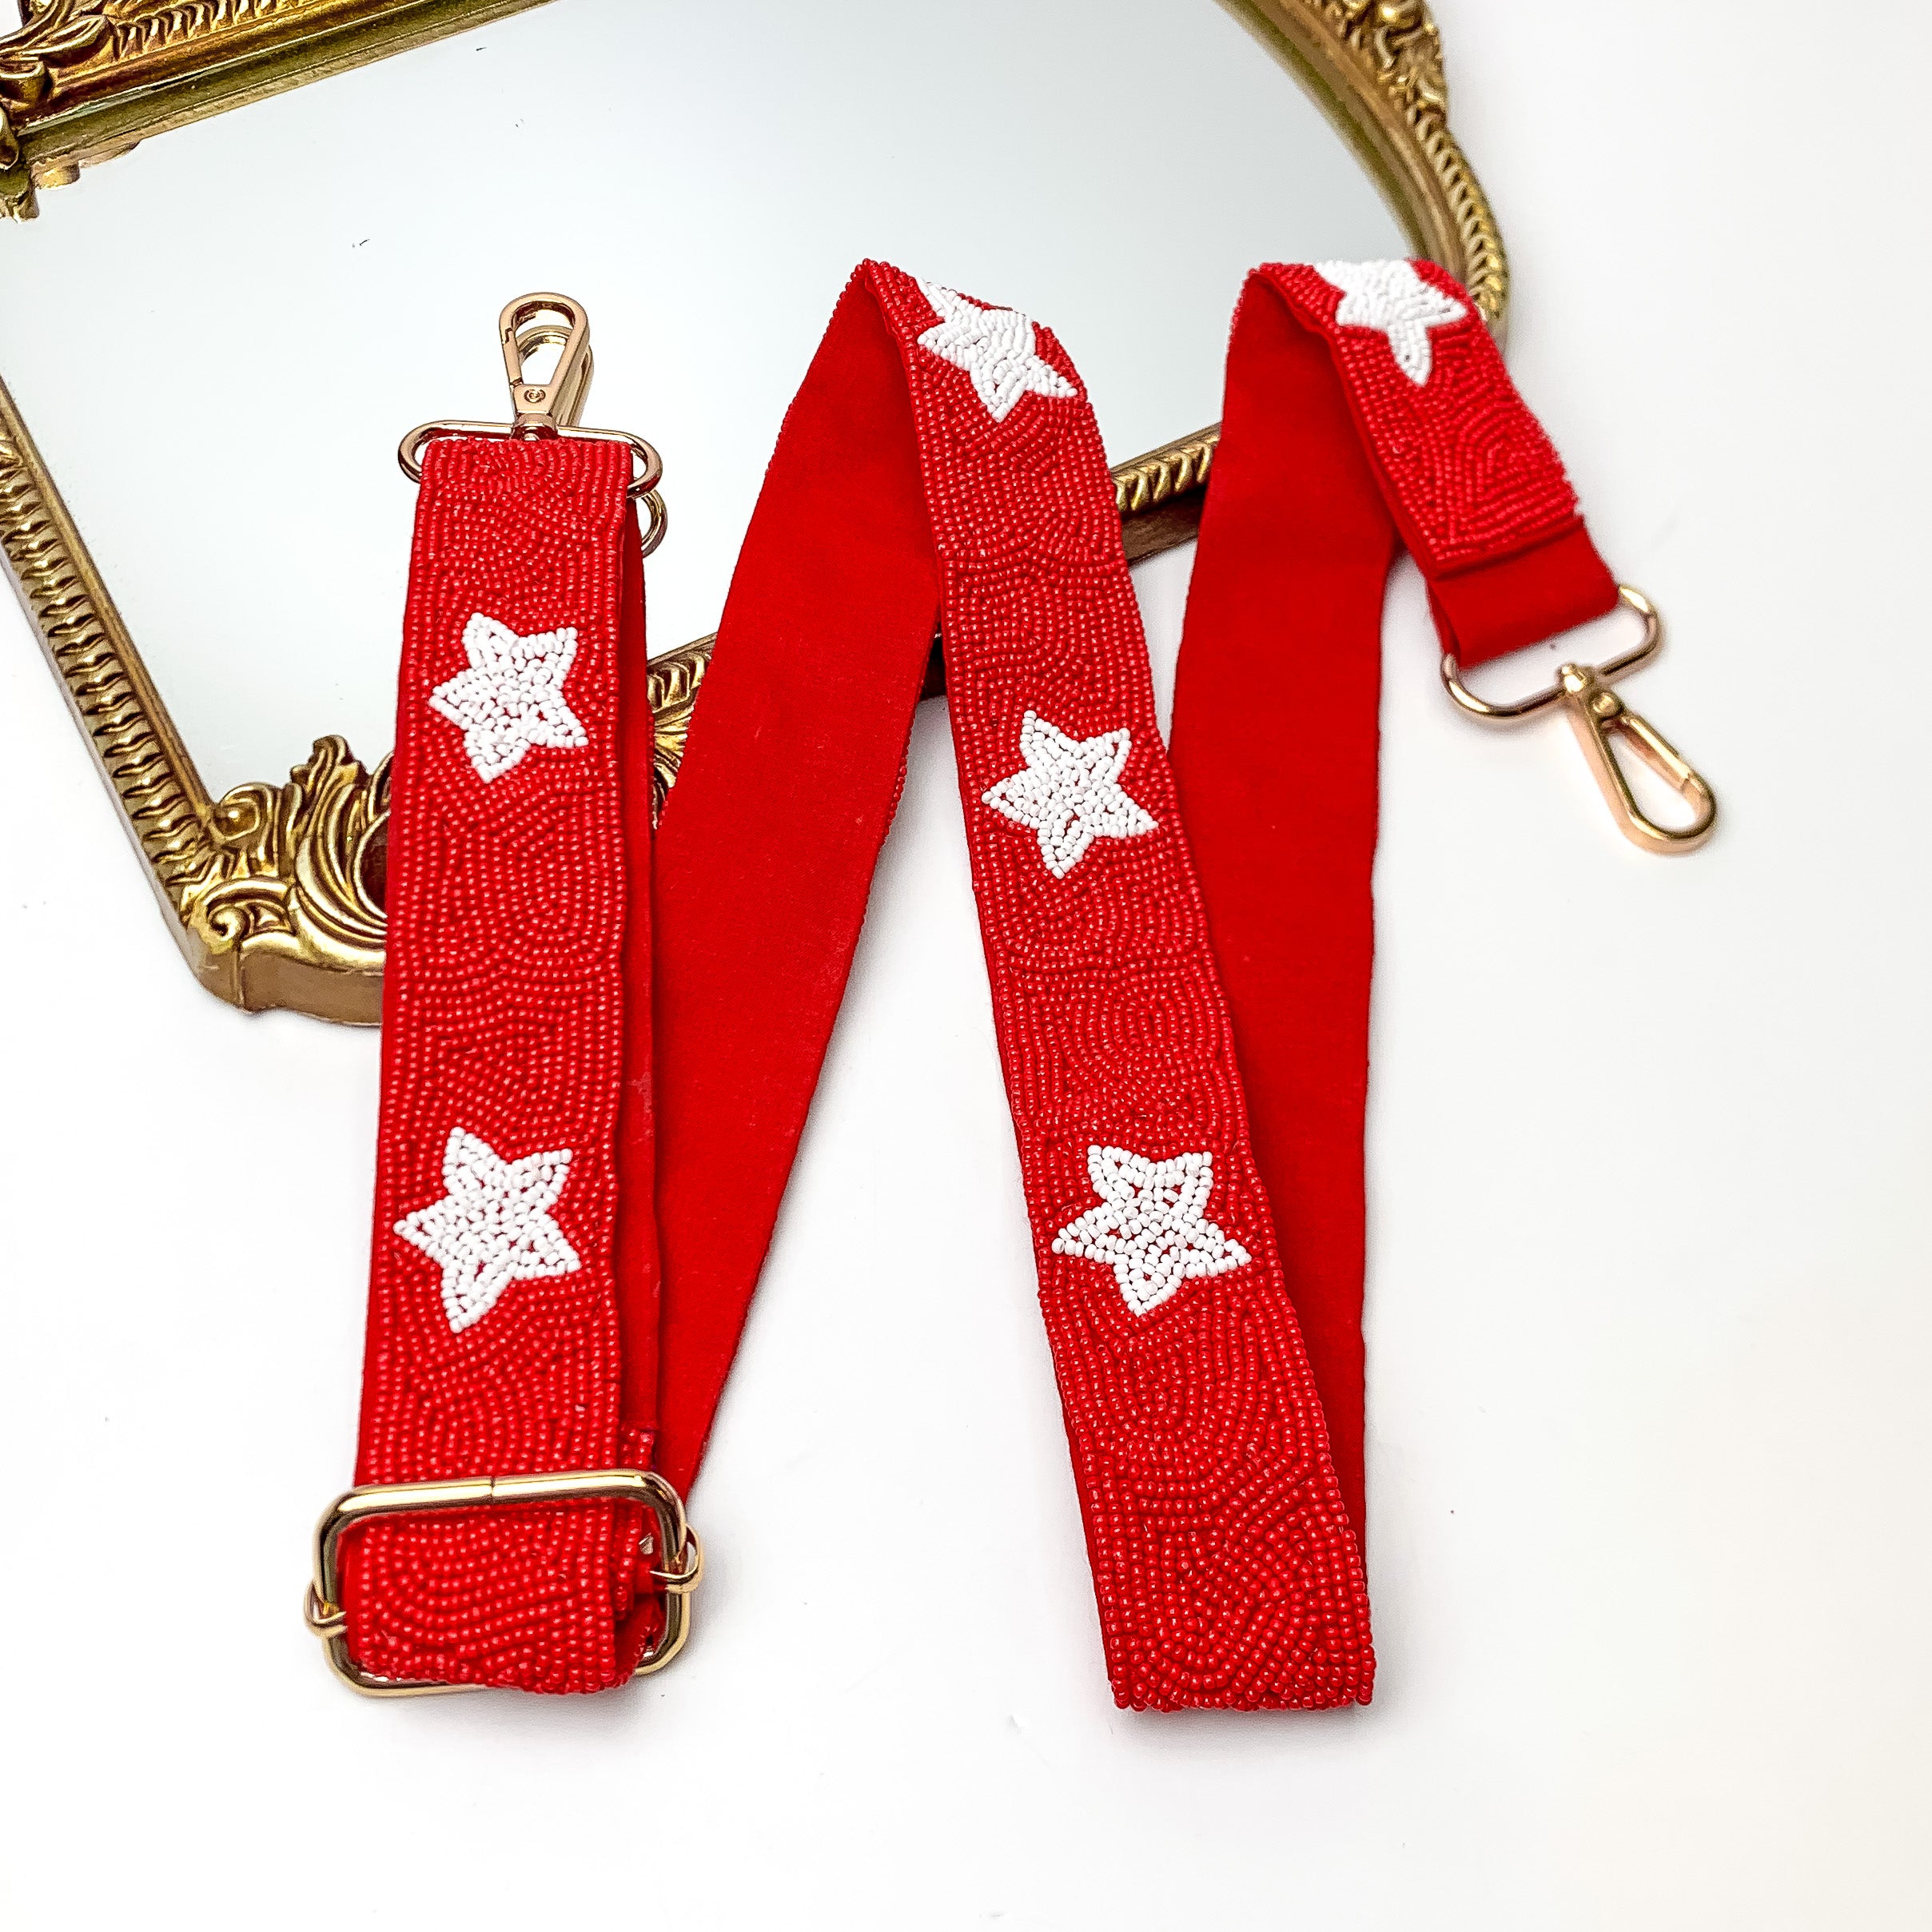 Star of the Show Beaded Adjustable Purse Strap in Red and White. This purse strap is pictured on a white background with a gold trimmed mirror in the corner.